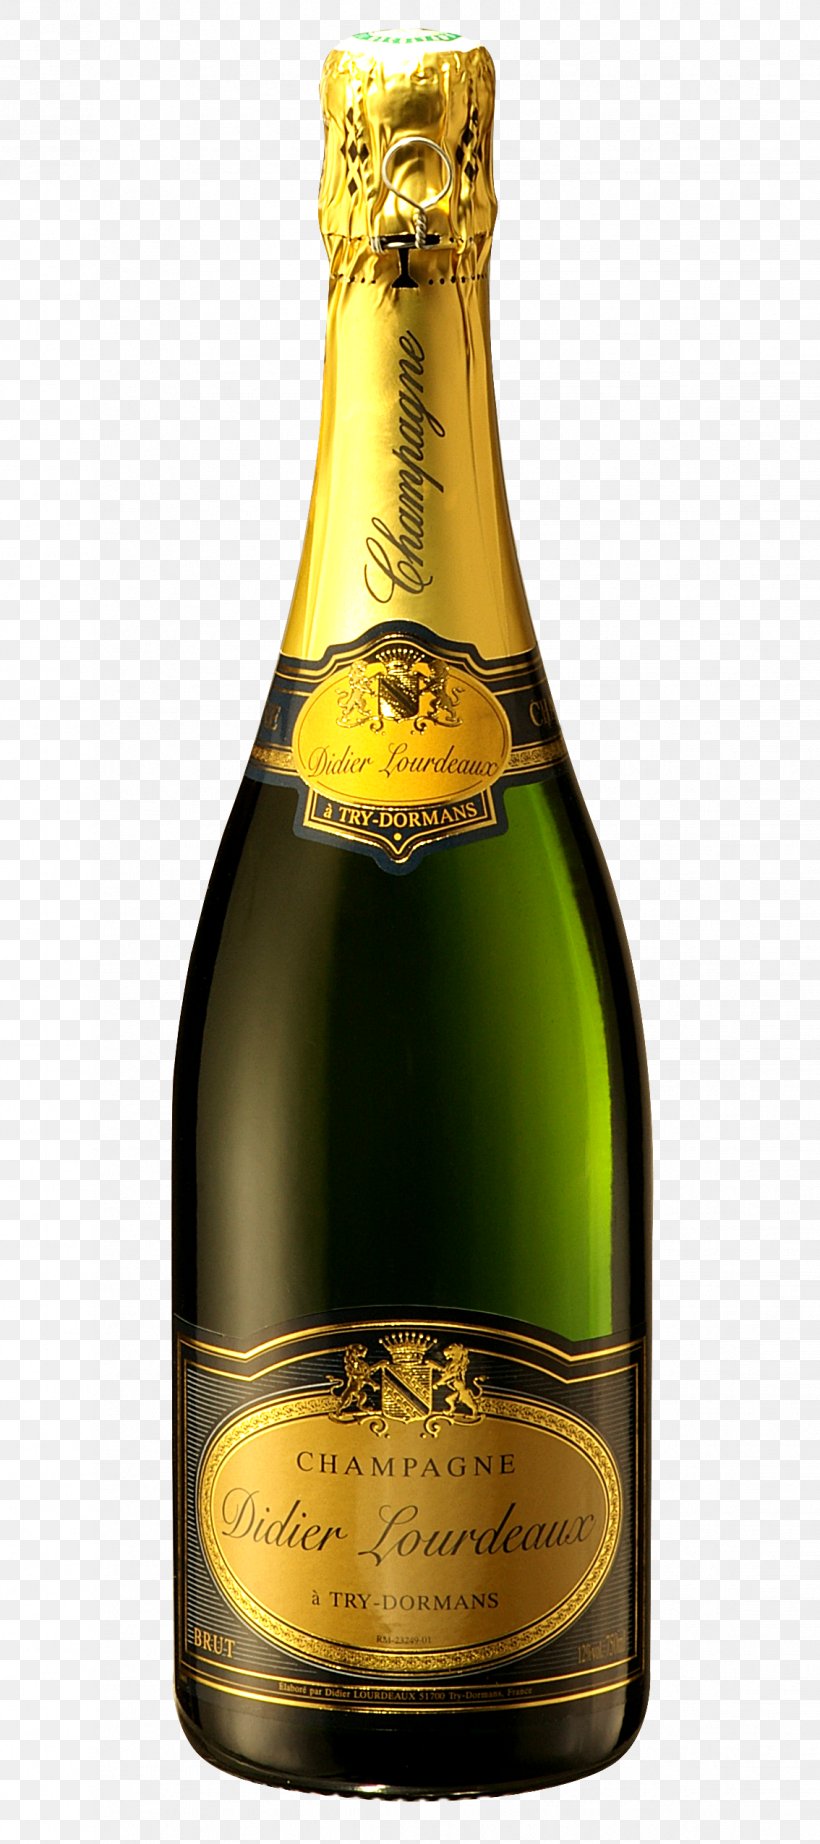 Champagne Wine Glass Bottle, PNG, 1134x2551px, Champagne, Alcoholic Beverage, Bottle, Drink, Glass Download Free